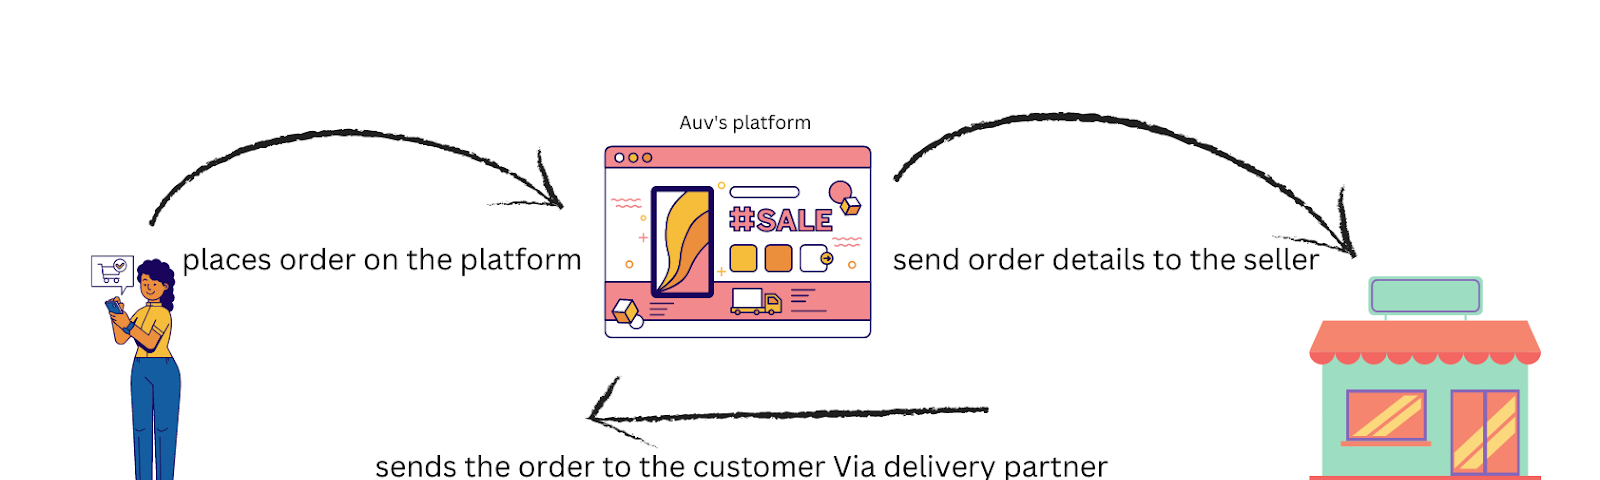 a diagrammatic representation of the functioning of an e-commerce platform, in this case it is a stationary platform, and a customer is placing her order there, the platform is notifying the seller who is then sending the order to the customer via a delivery partner.